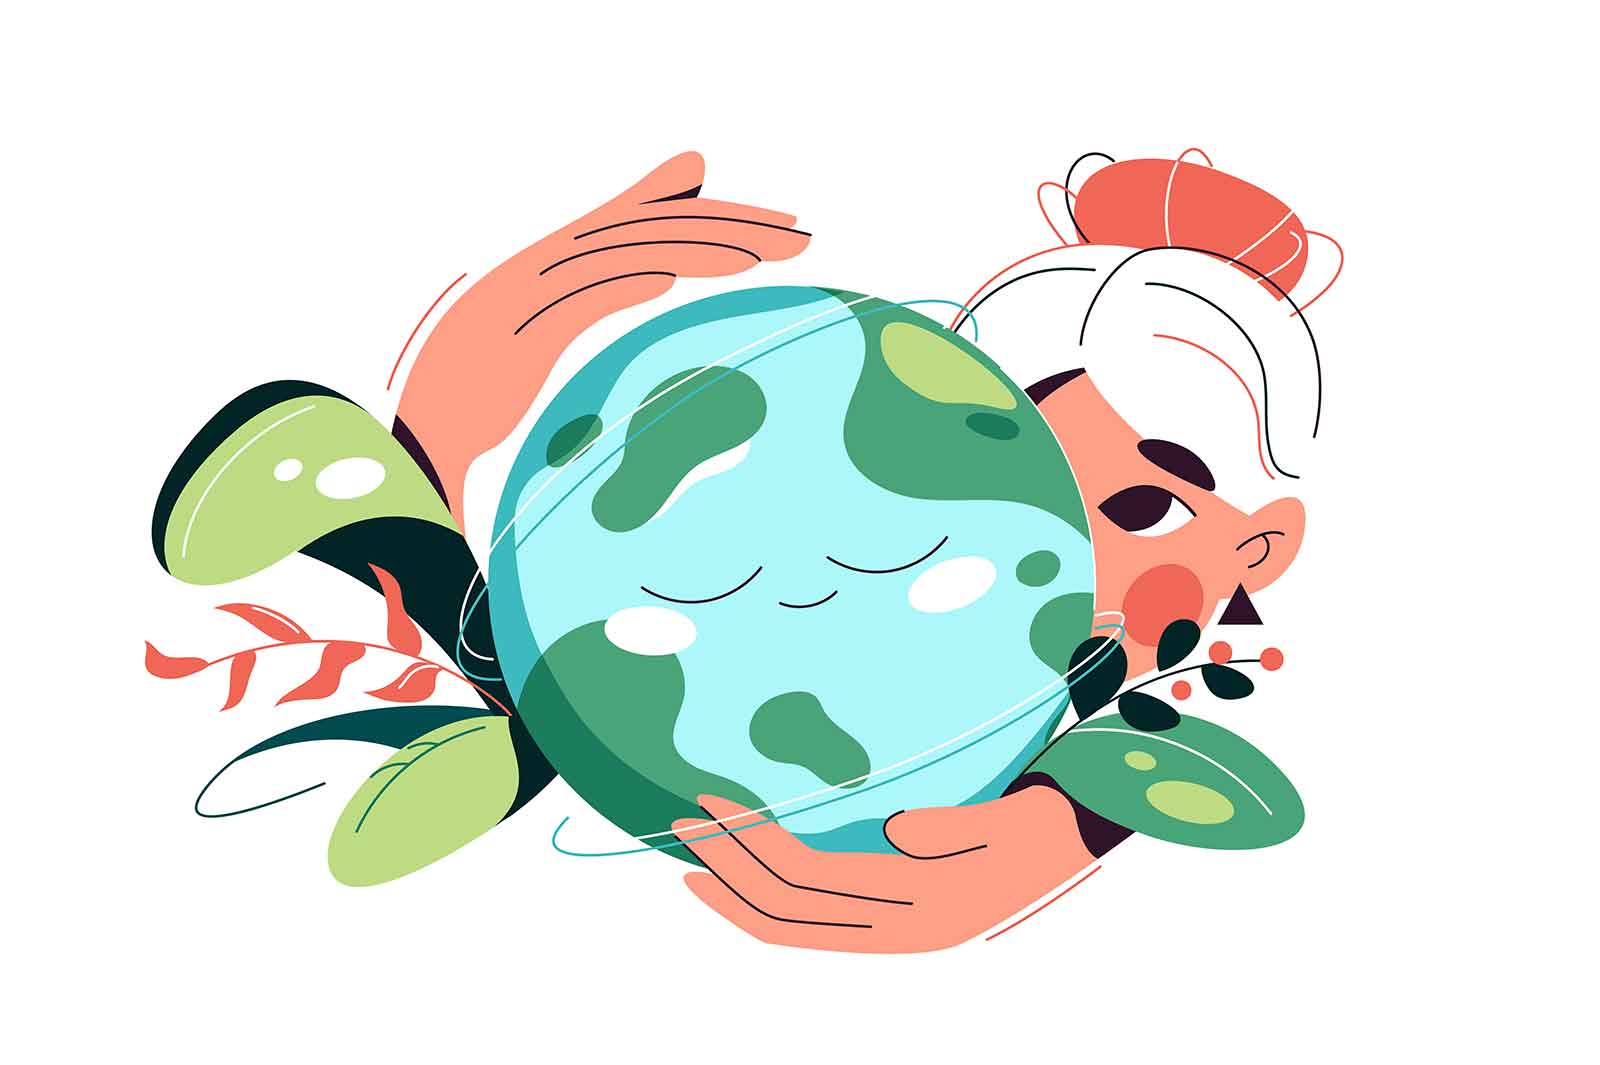 A planet resting in human hand. Save the planet concept, vector illustration.